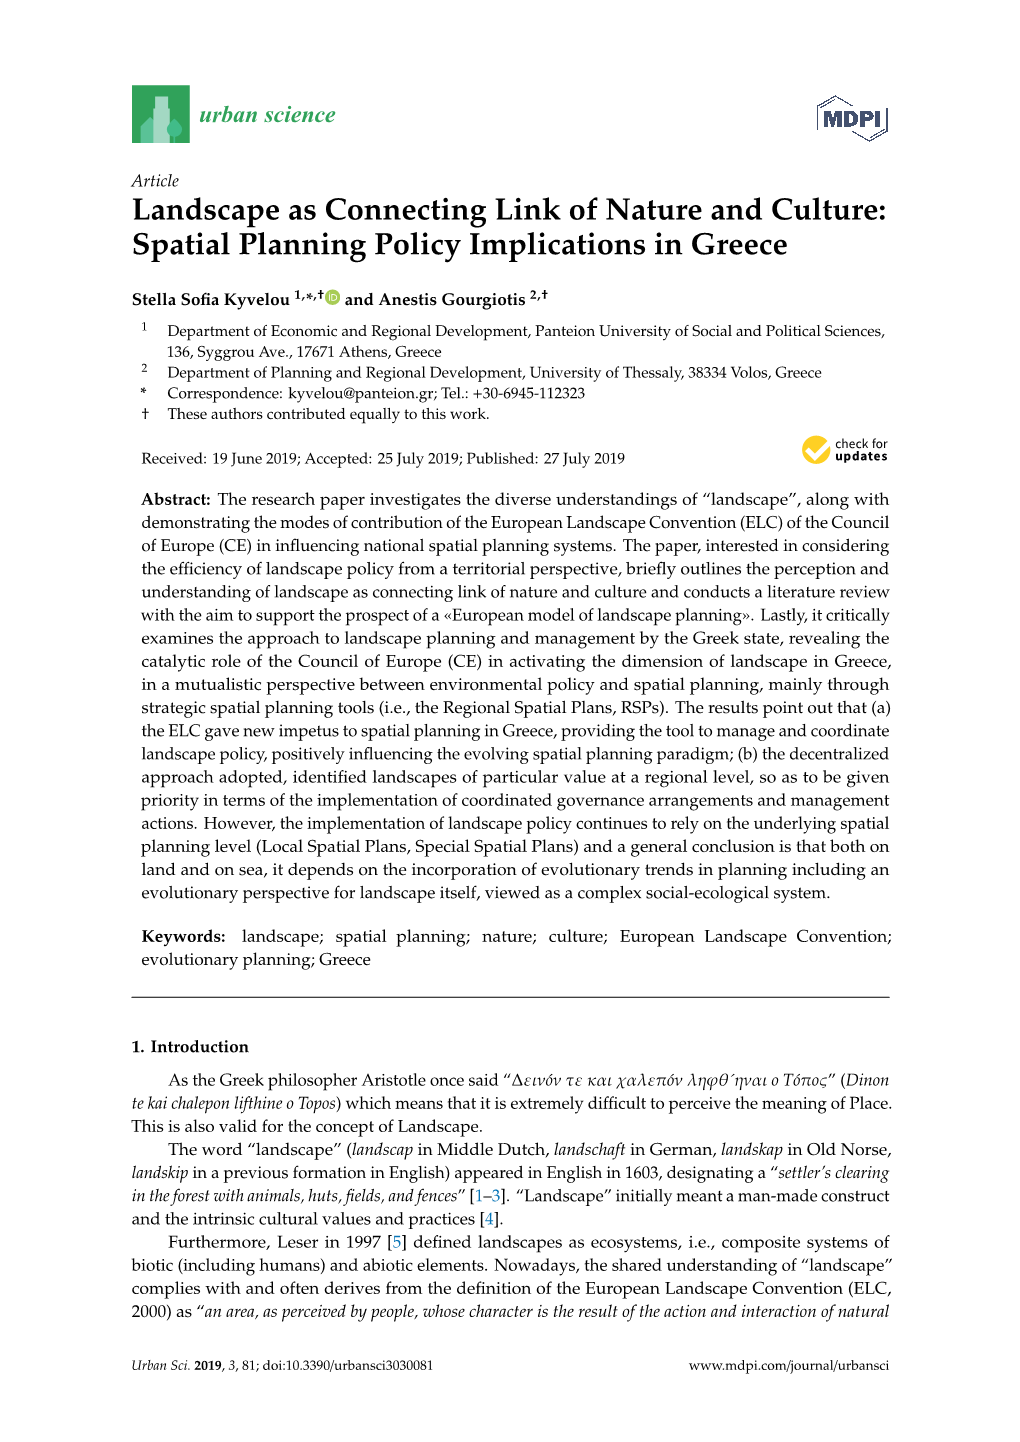 Landscape As Connecting Link of Nature and Culture: Spatial Planning Policy Implications in Greece